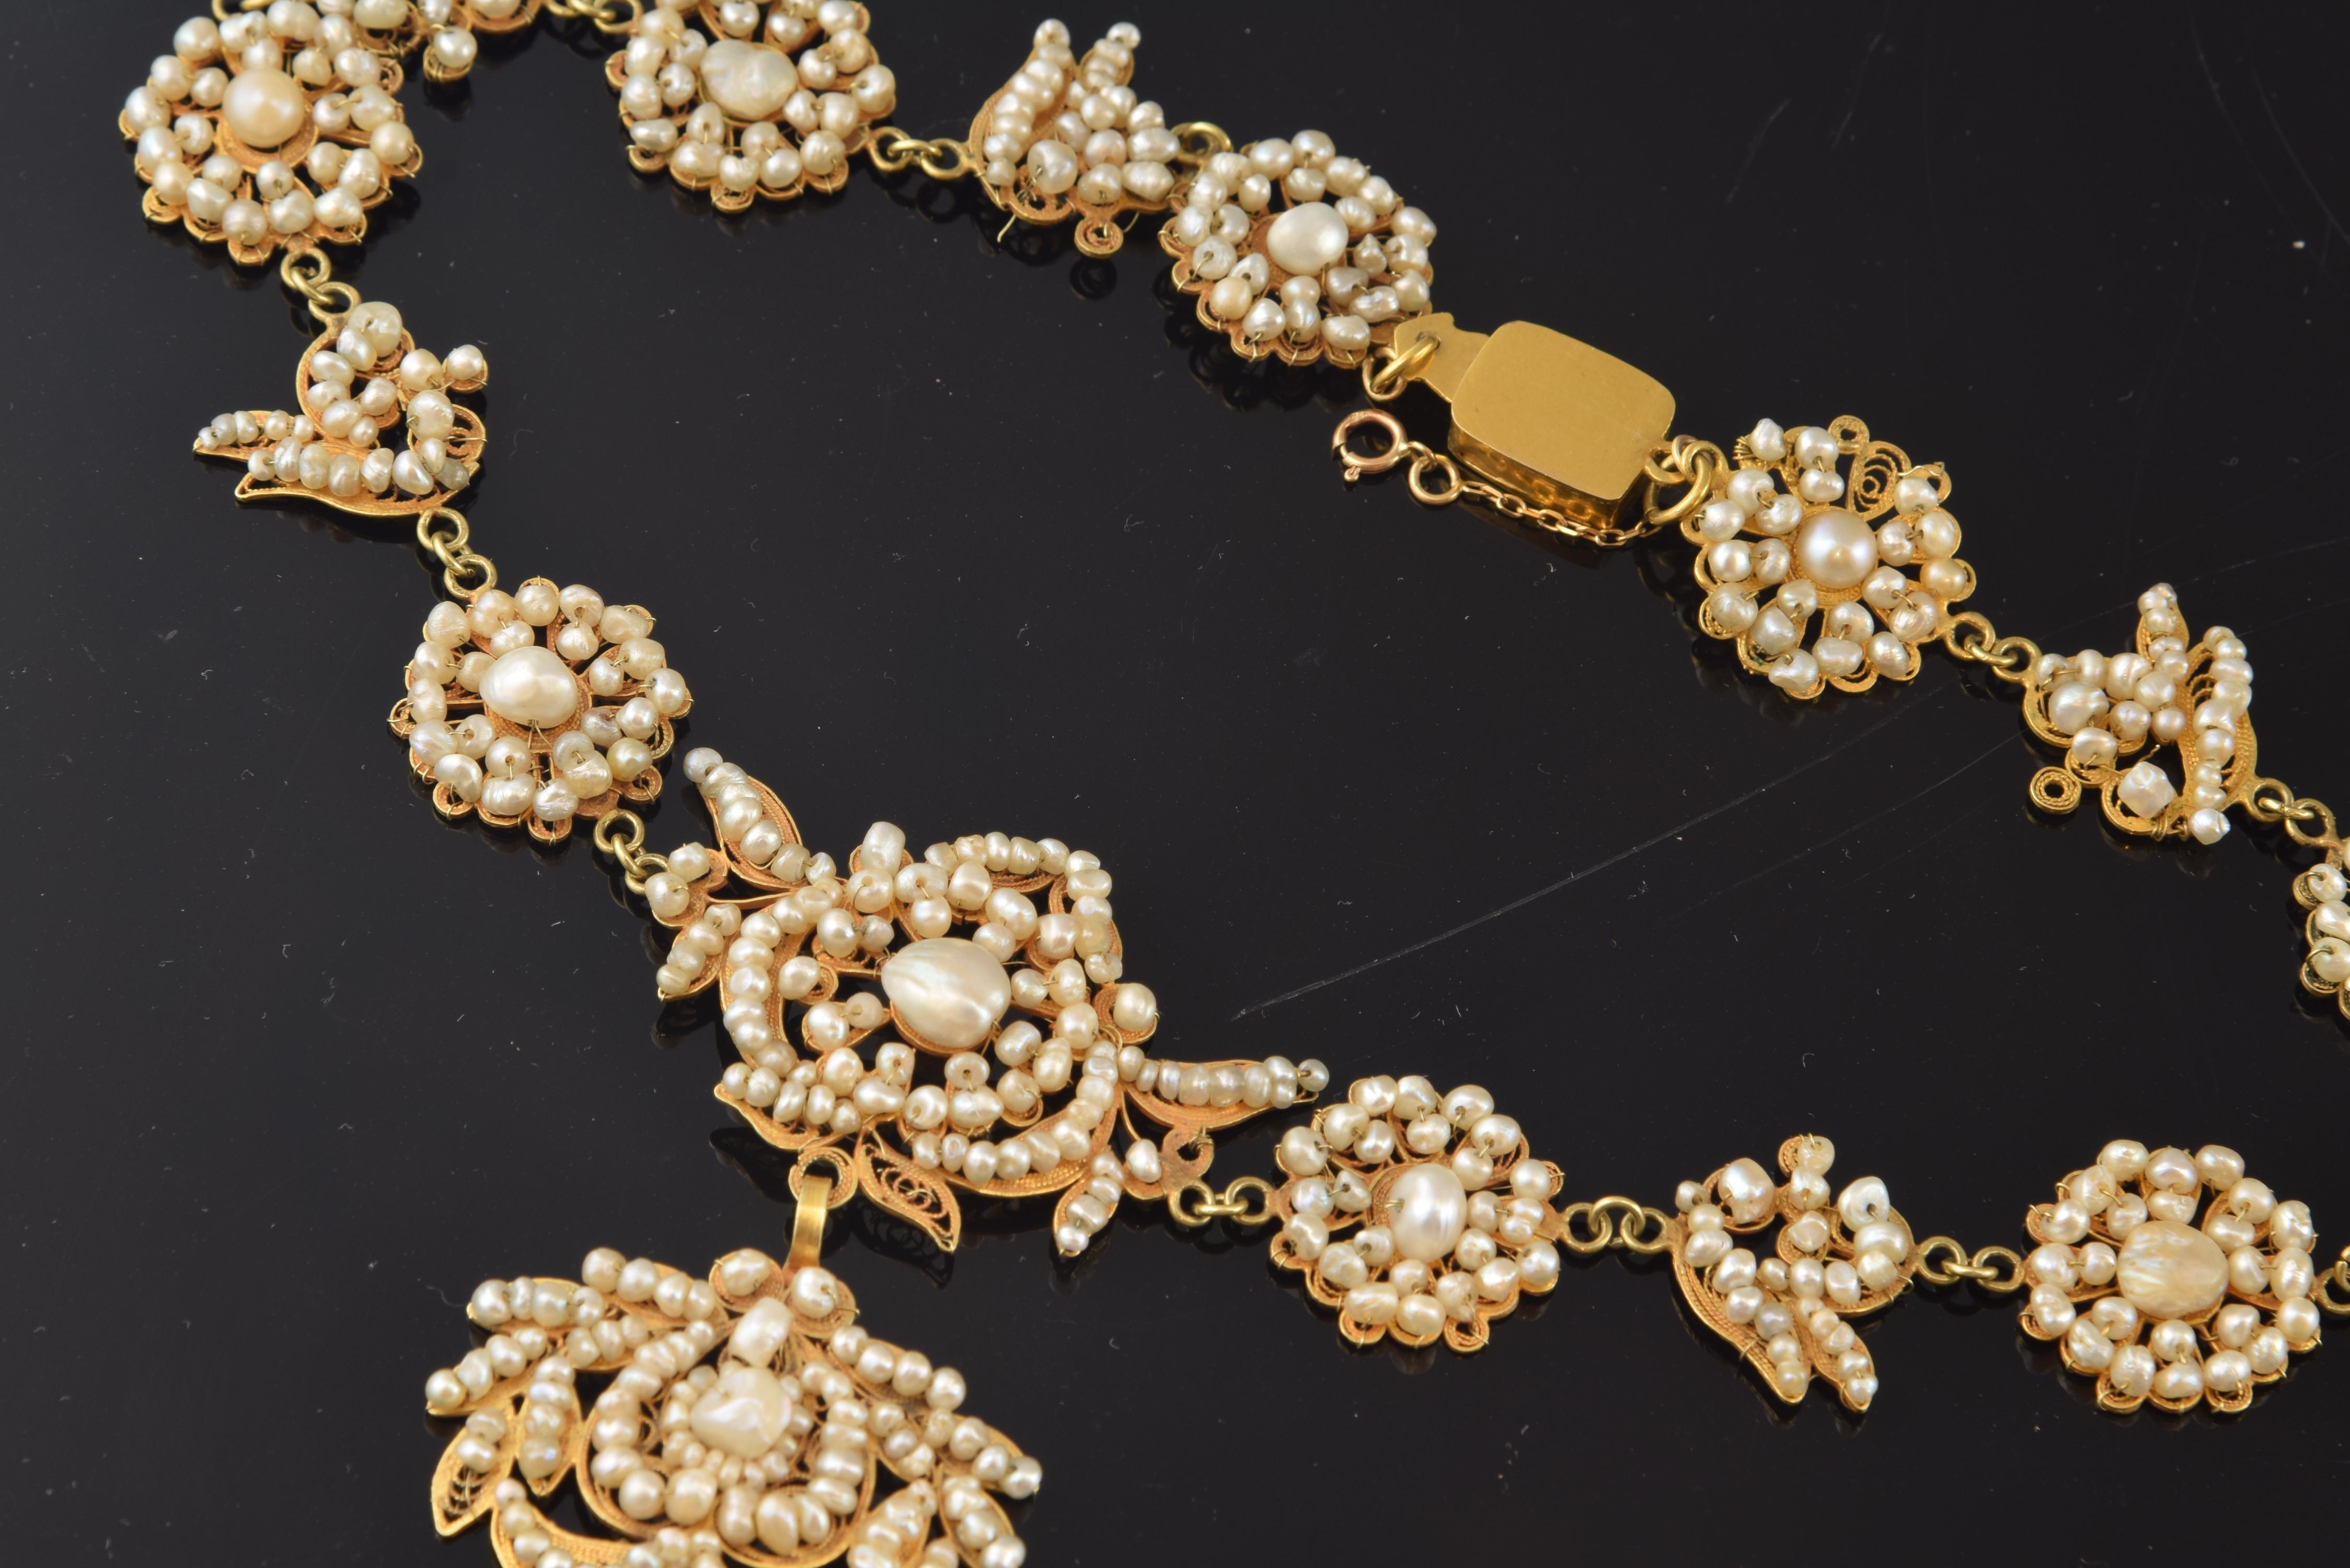 Popular style choker. Spain, circa late 19th century.
Gold choker and small pearls (of different shapes and sizes) with a rectangular closure secured with a chain and another ring clasp, which has a series of 